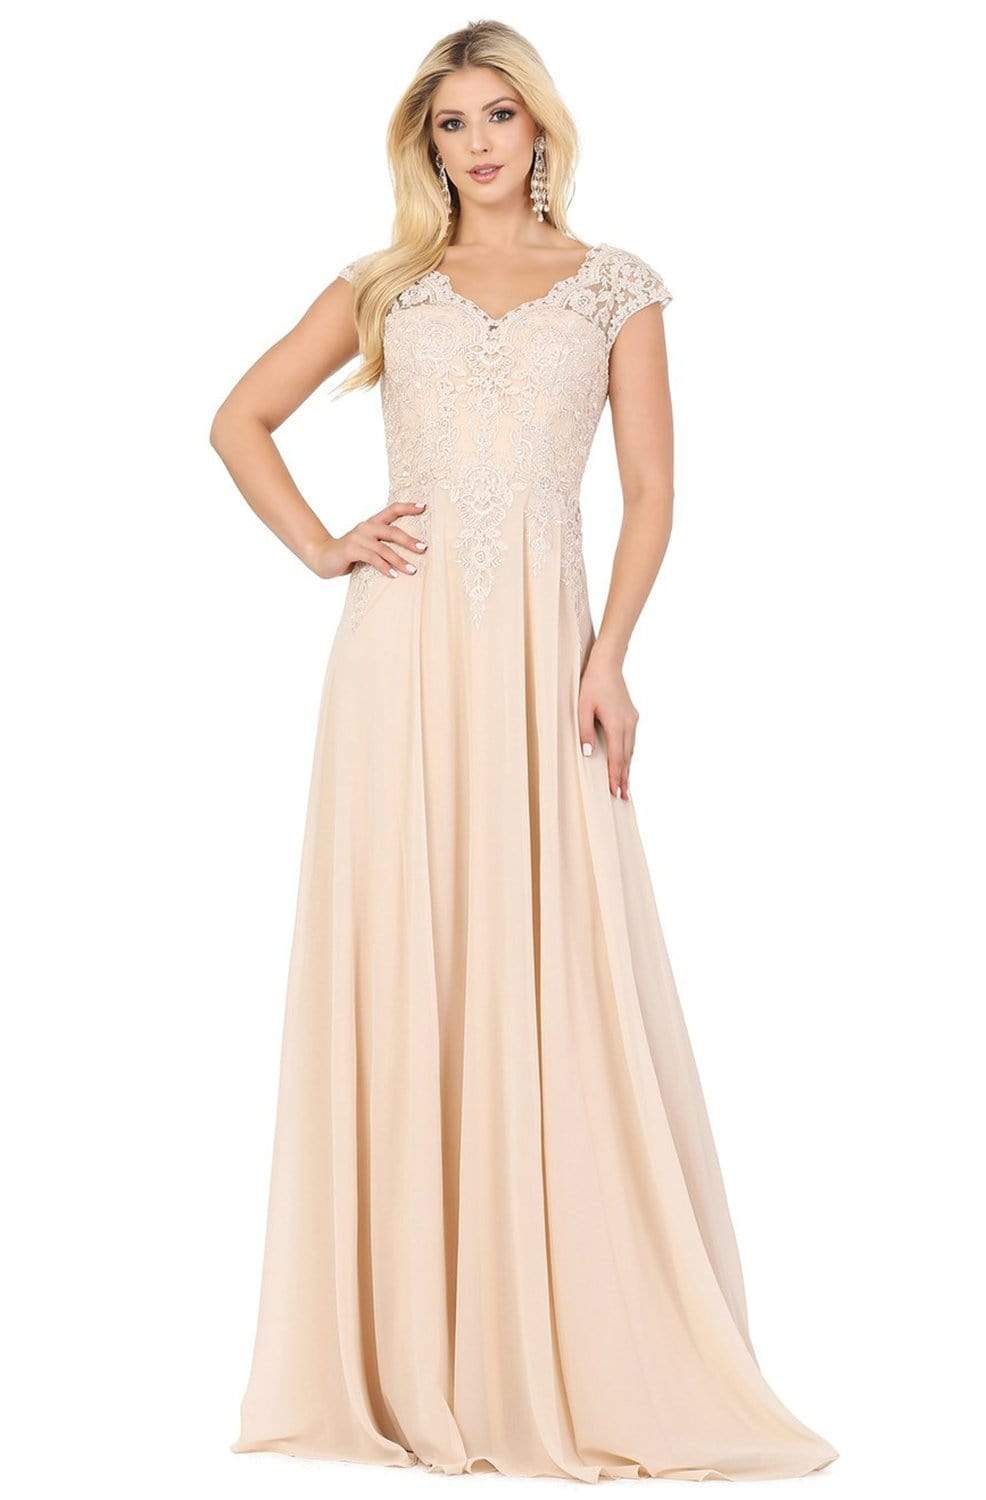 Image of Dancing Queen - 4122 Sheer Cap Sleeve Floral Lace Bodice Dress